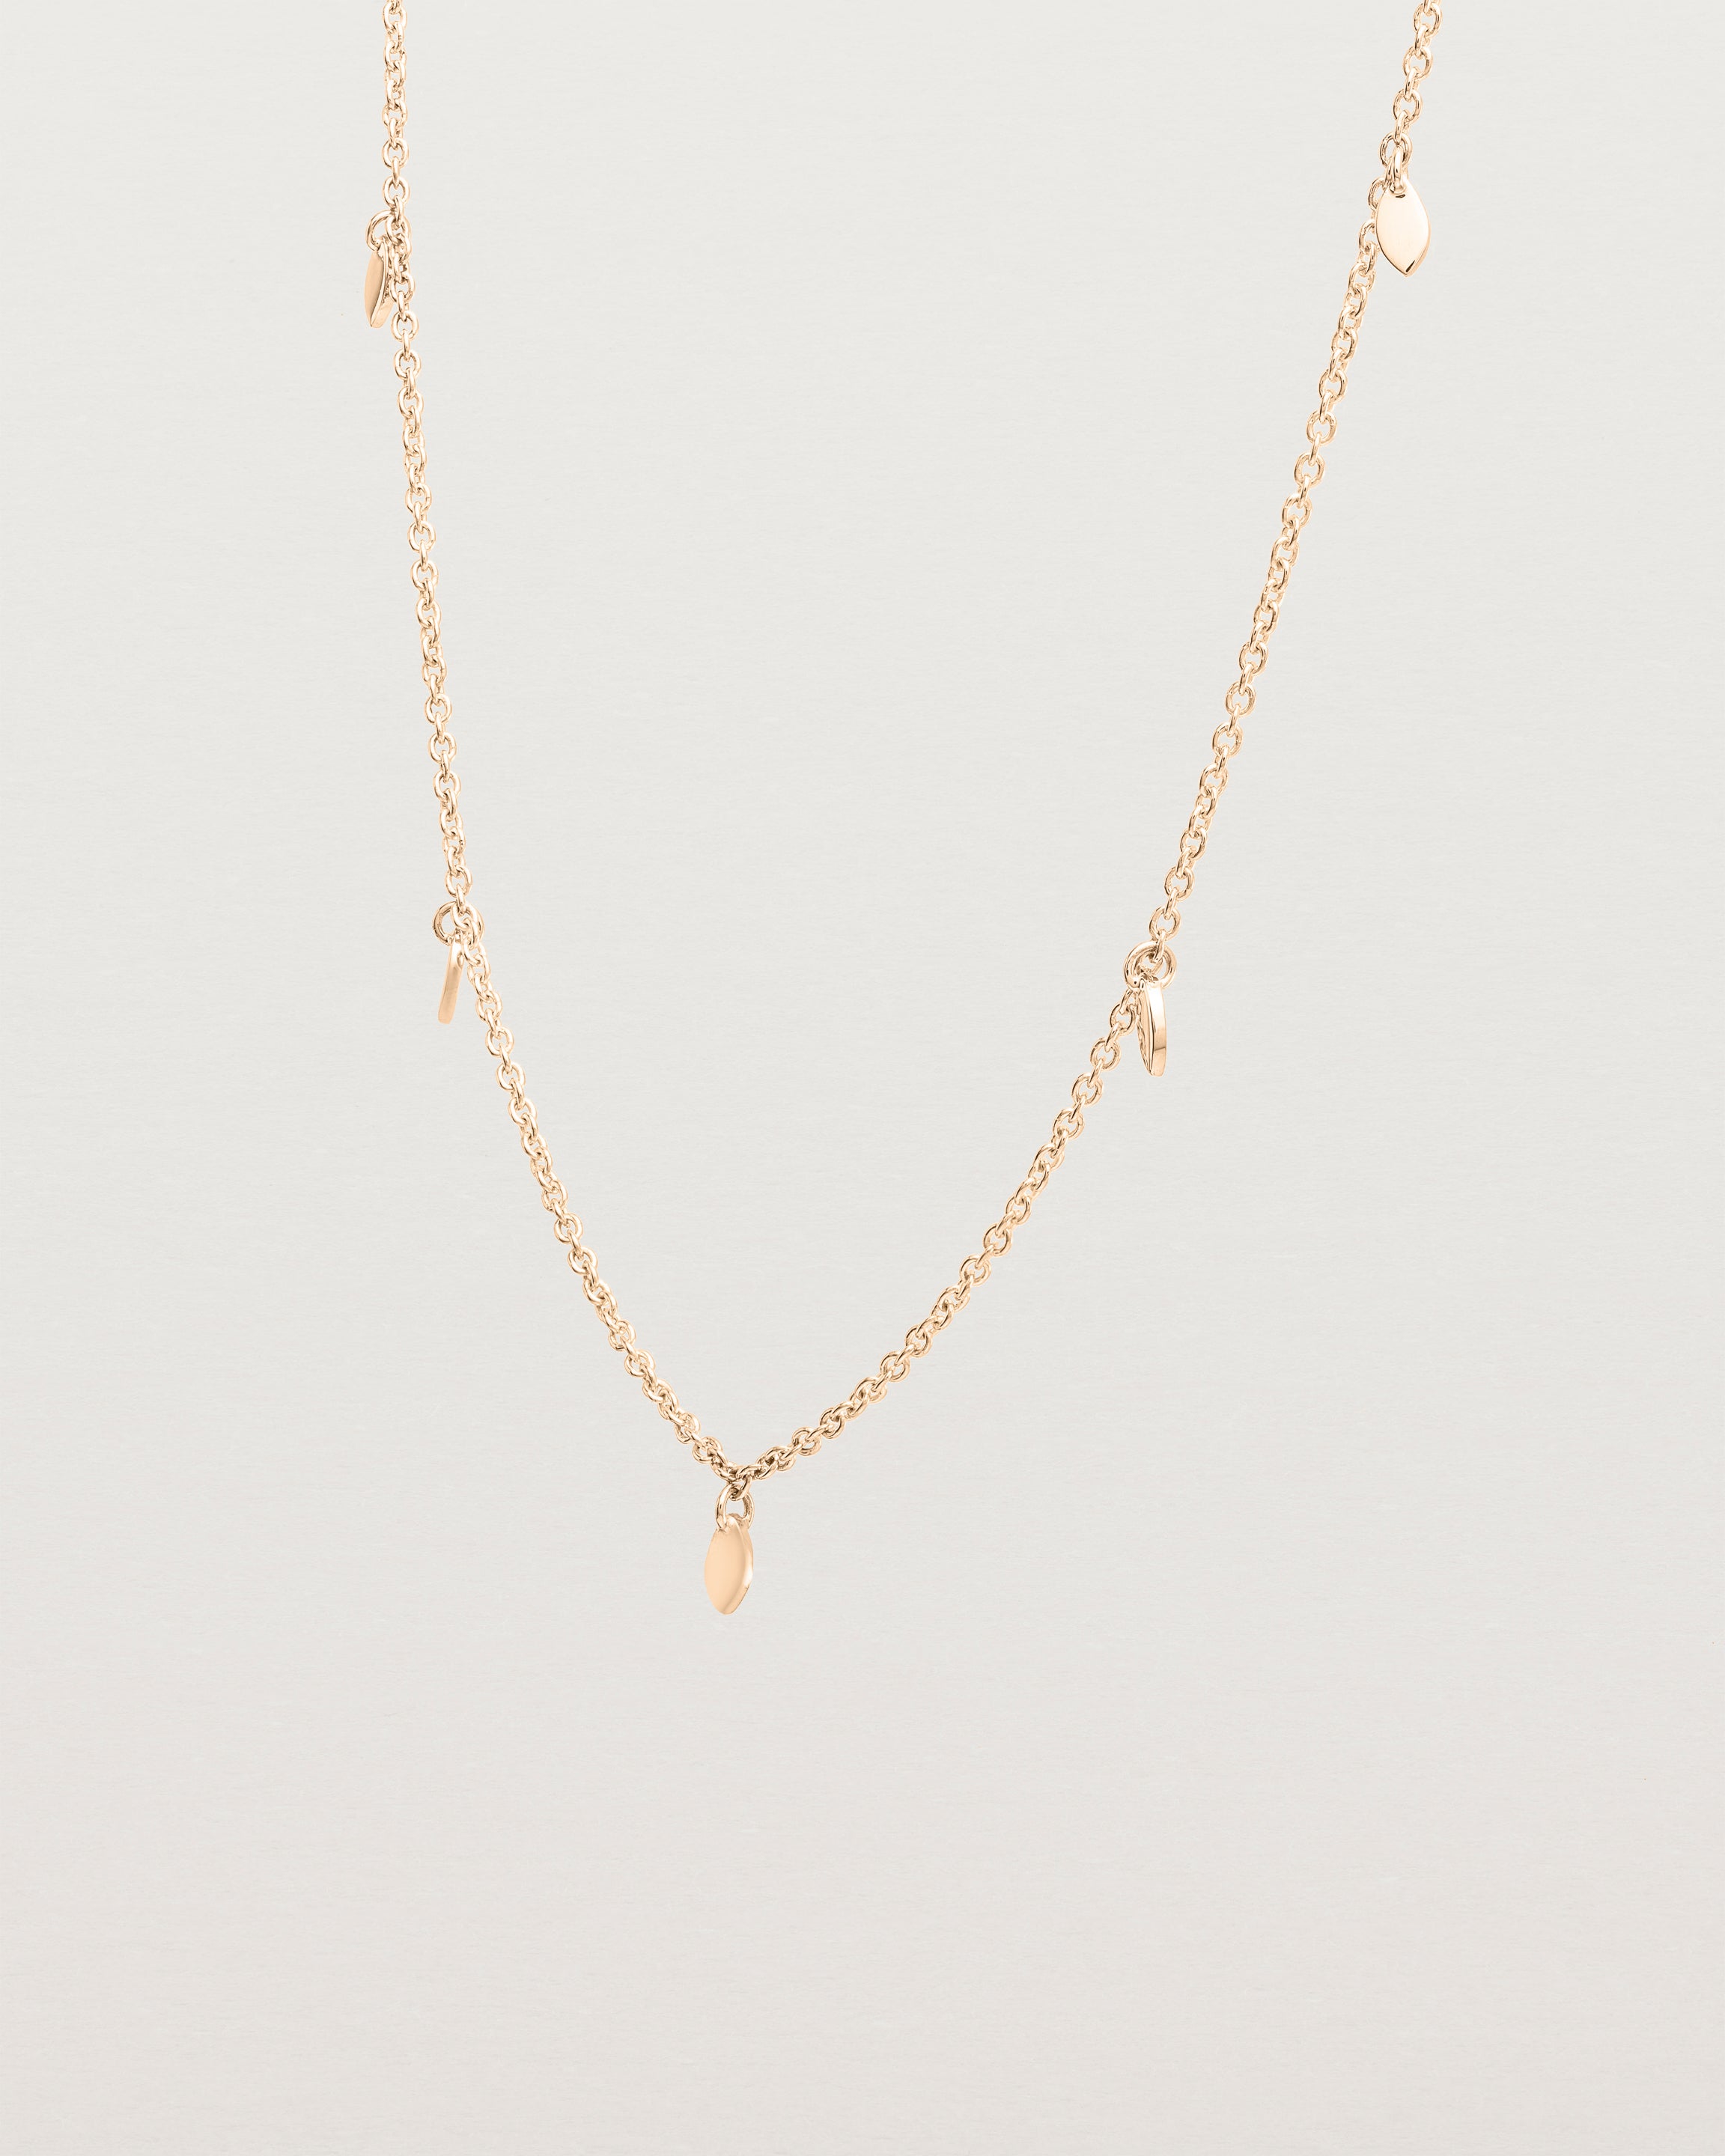 Angled view of the Daisy Chain Necklace | Rose Gold.